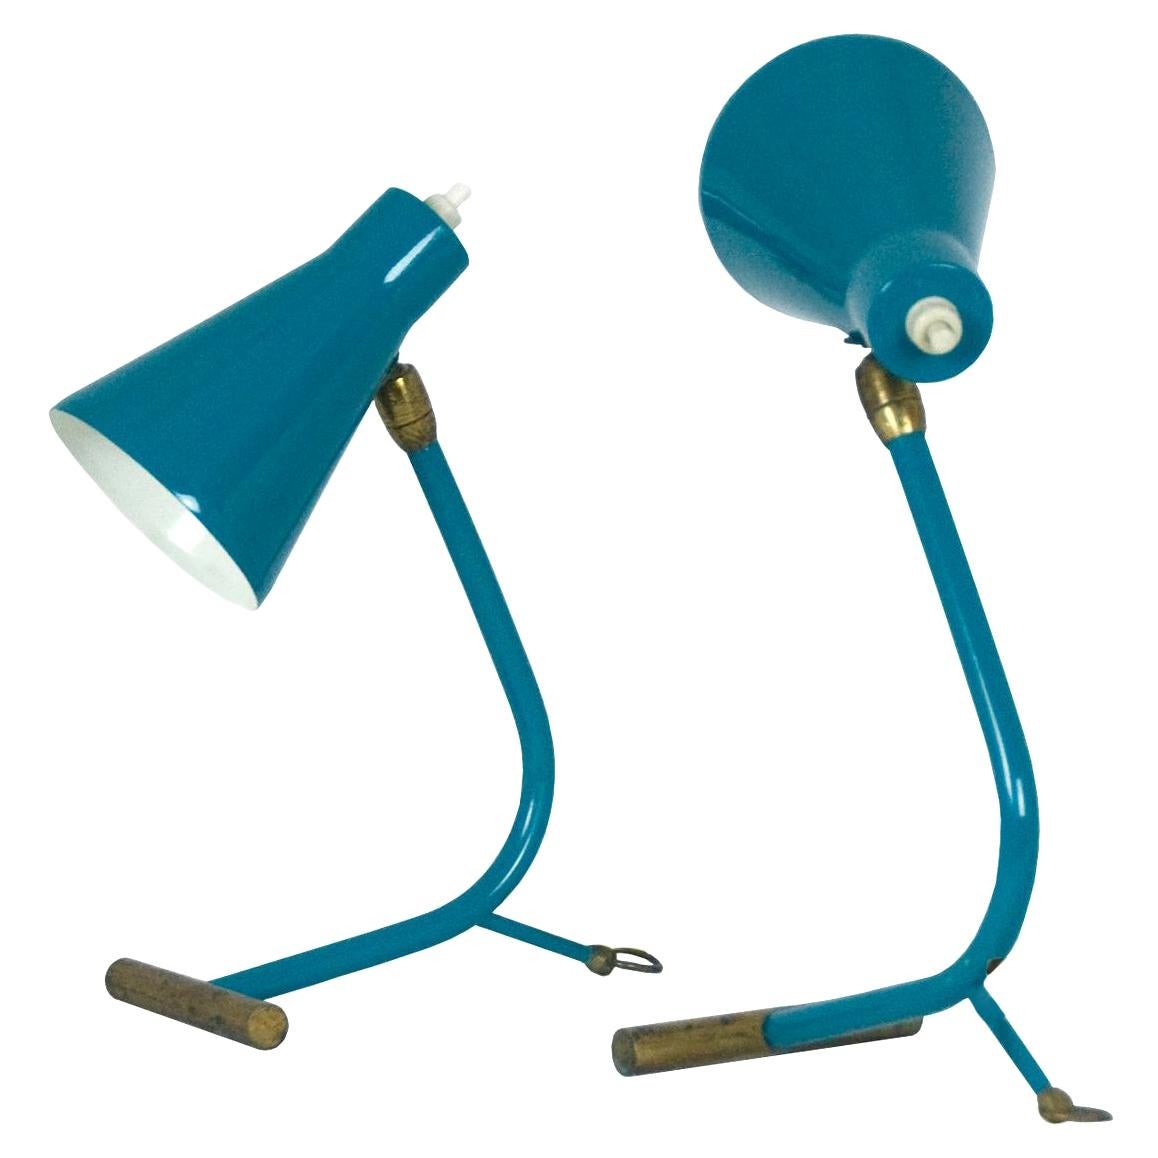 Midcentury Italian Teal Green and Brass Table Lamps Attributed to Stilnovo, 1950 For Sale